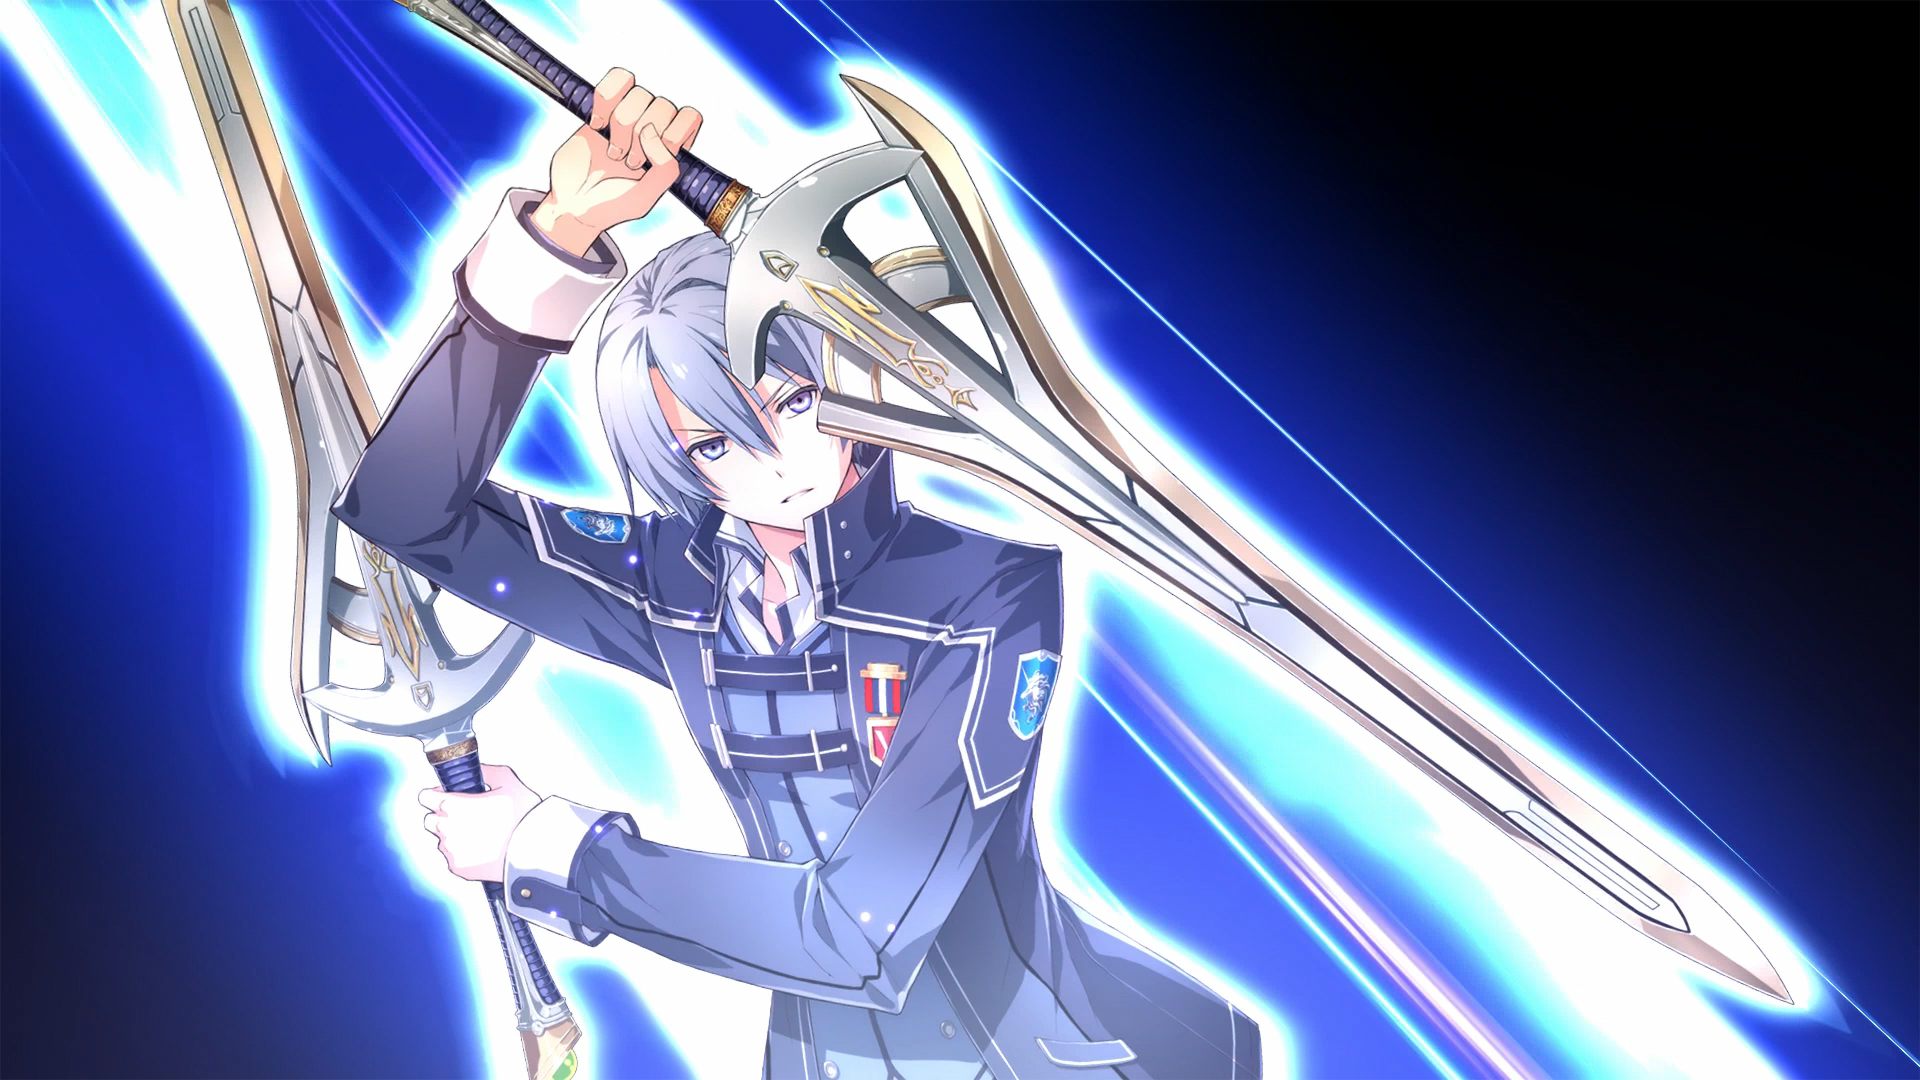 Western Playable Demo Now Available for The Legend of Heroes: Trails of Cold Steel III